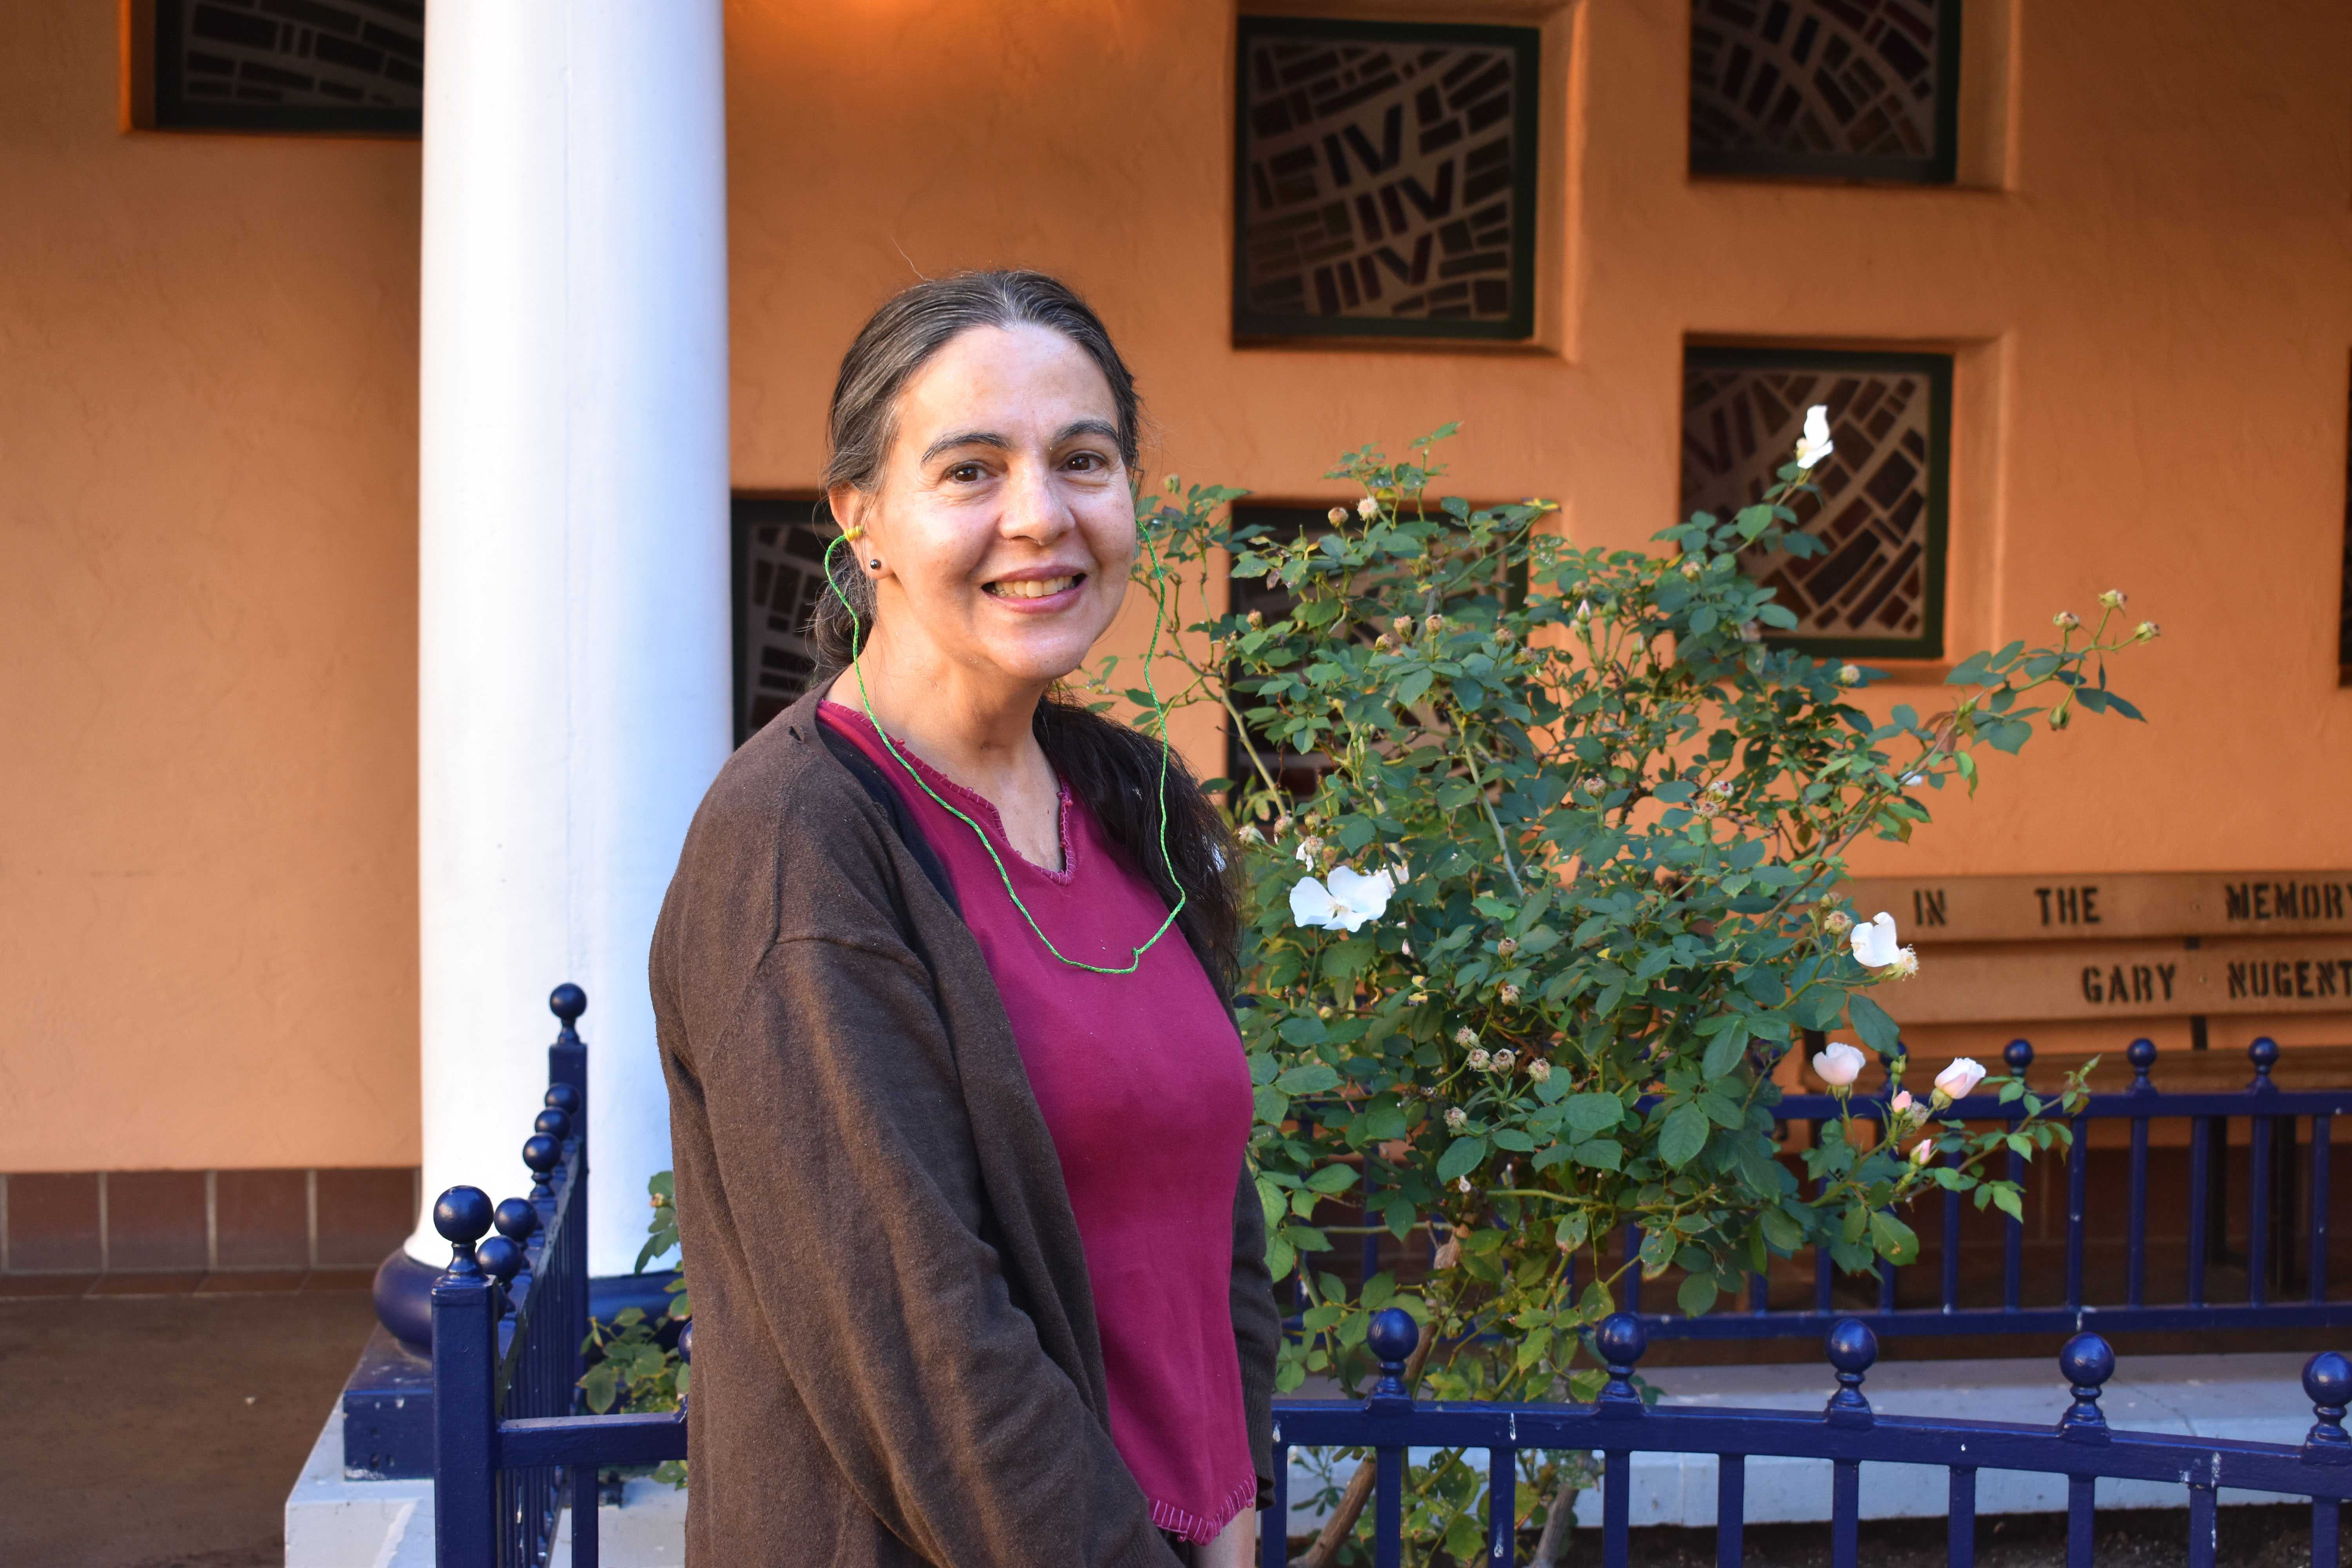 Elizabeth standing in the JKC courtyard | homeless health care at Father Joe's Villages clinic